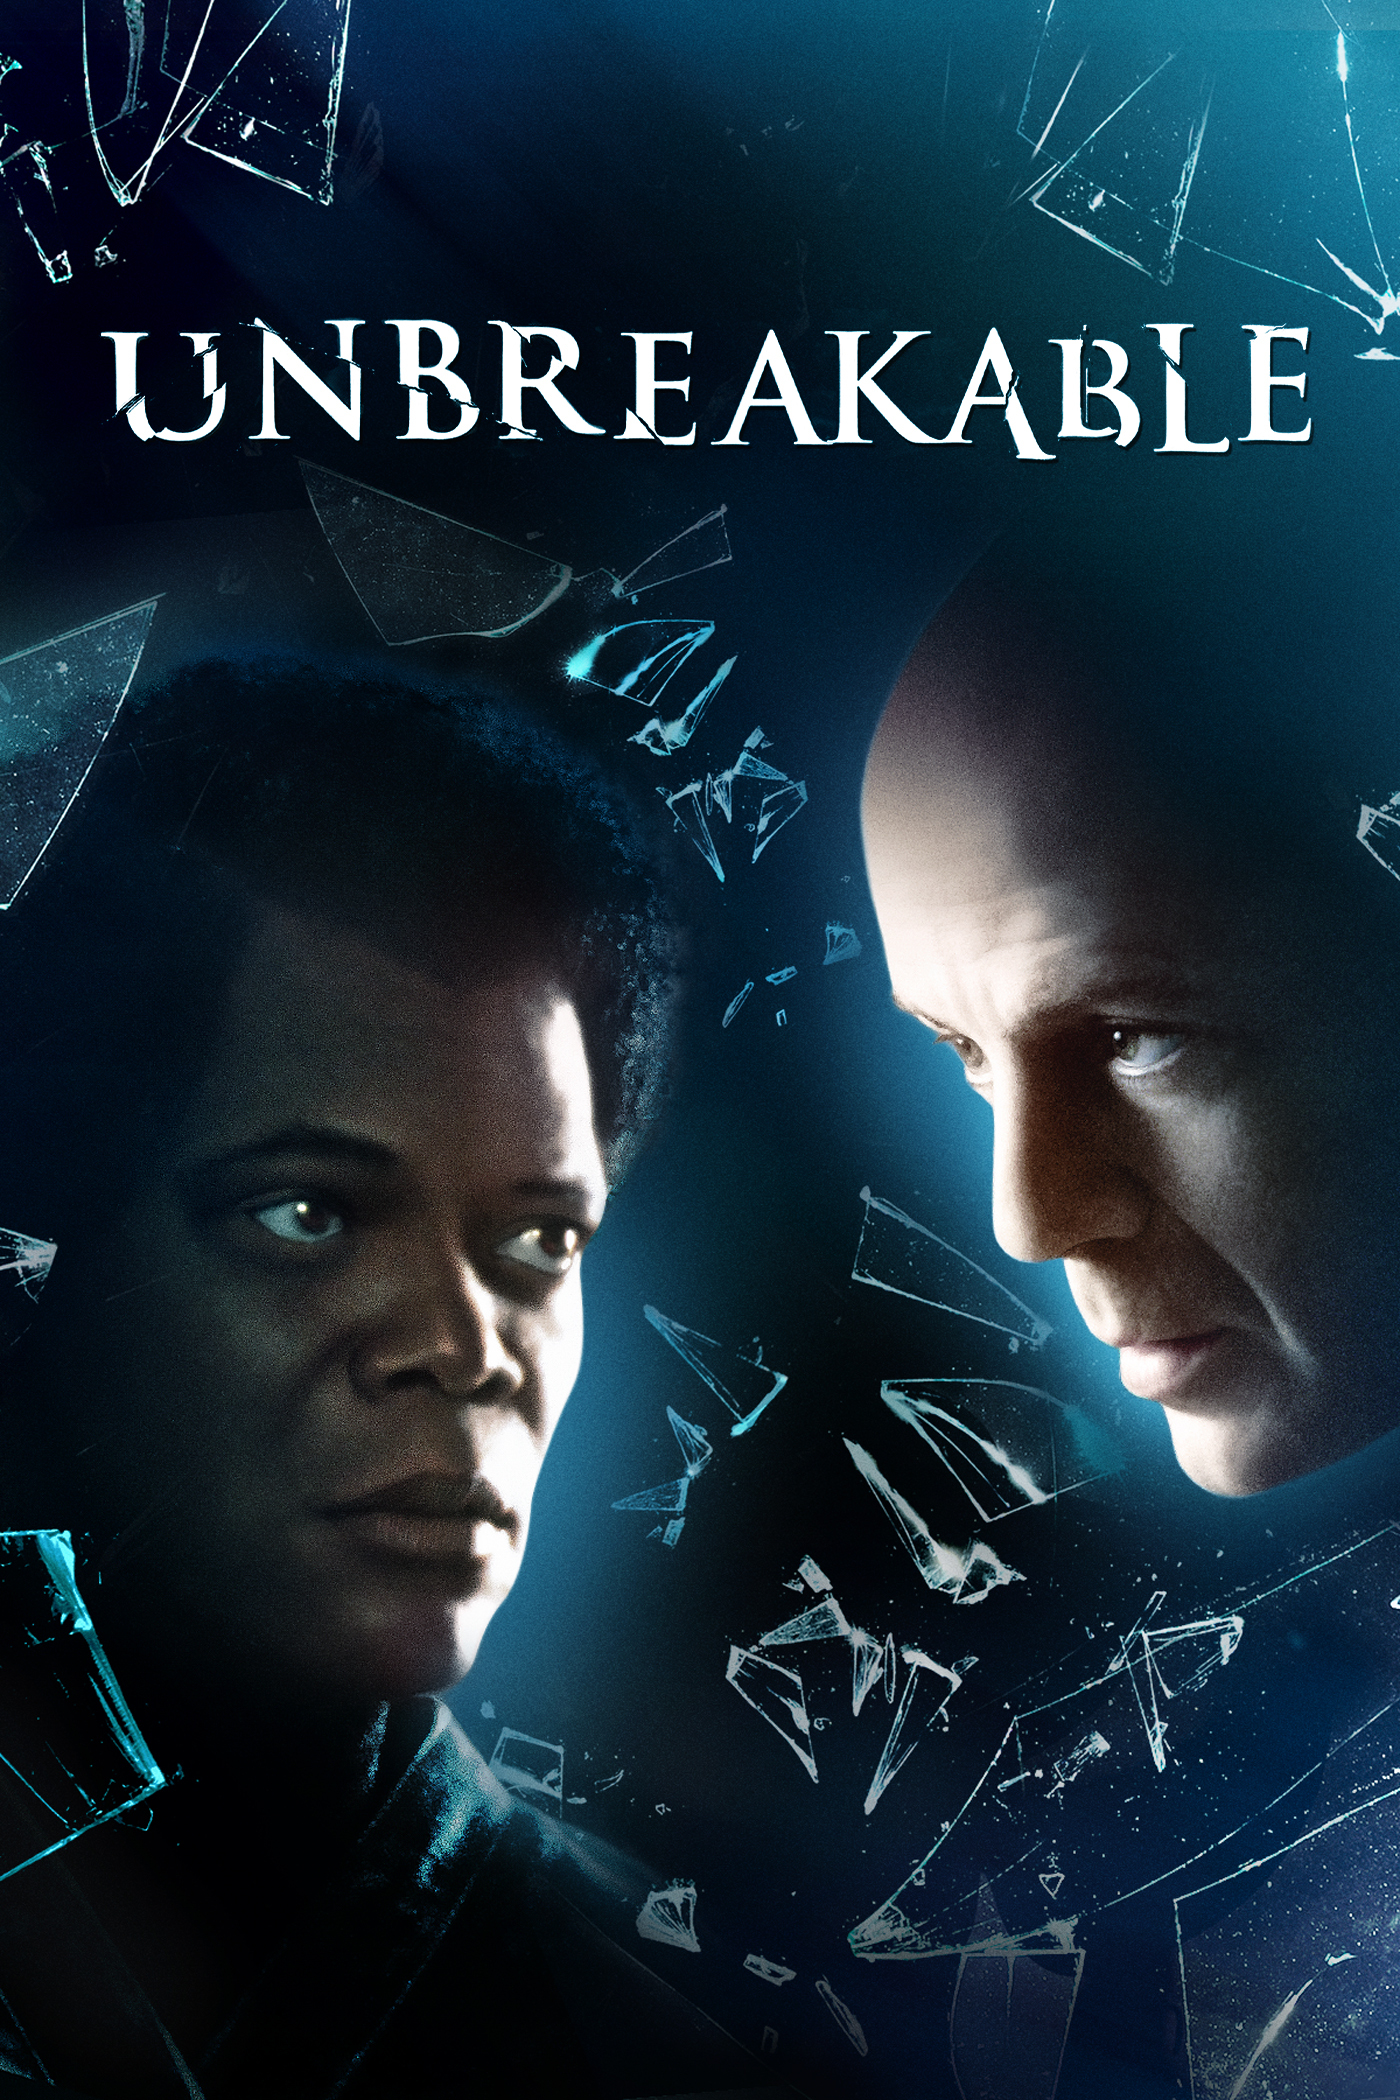 Unbreakable Now Available On Demand.